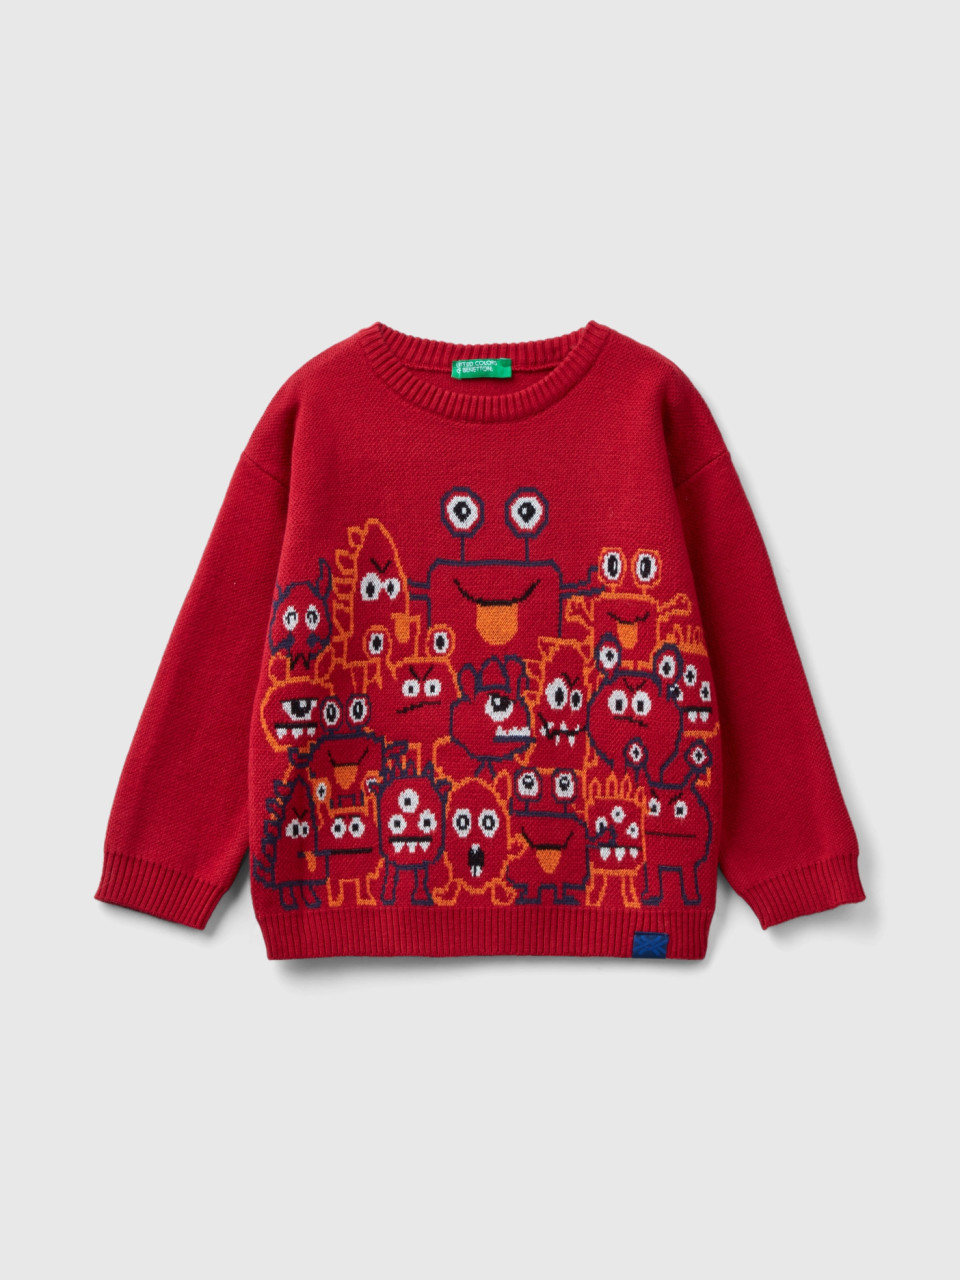 Benetton, Sweater With Monster Graphics, Red, Kids